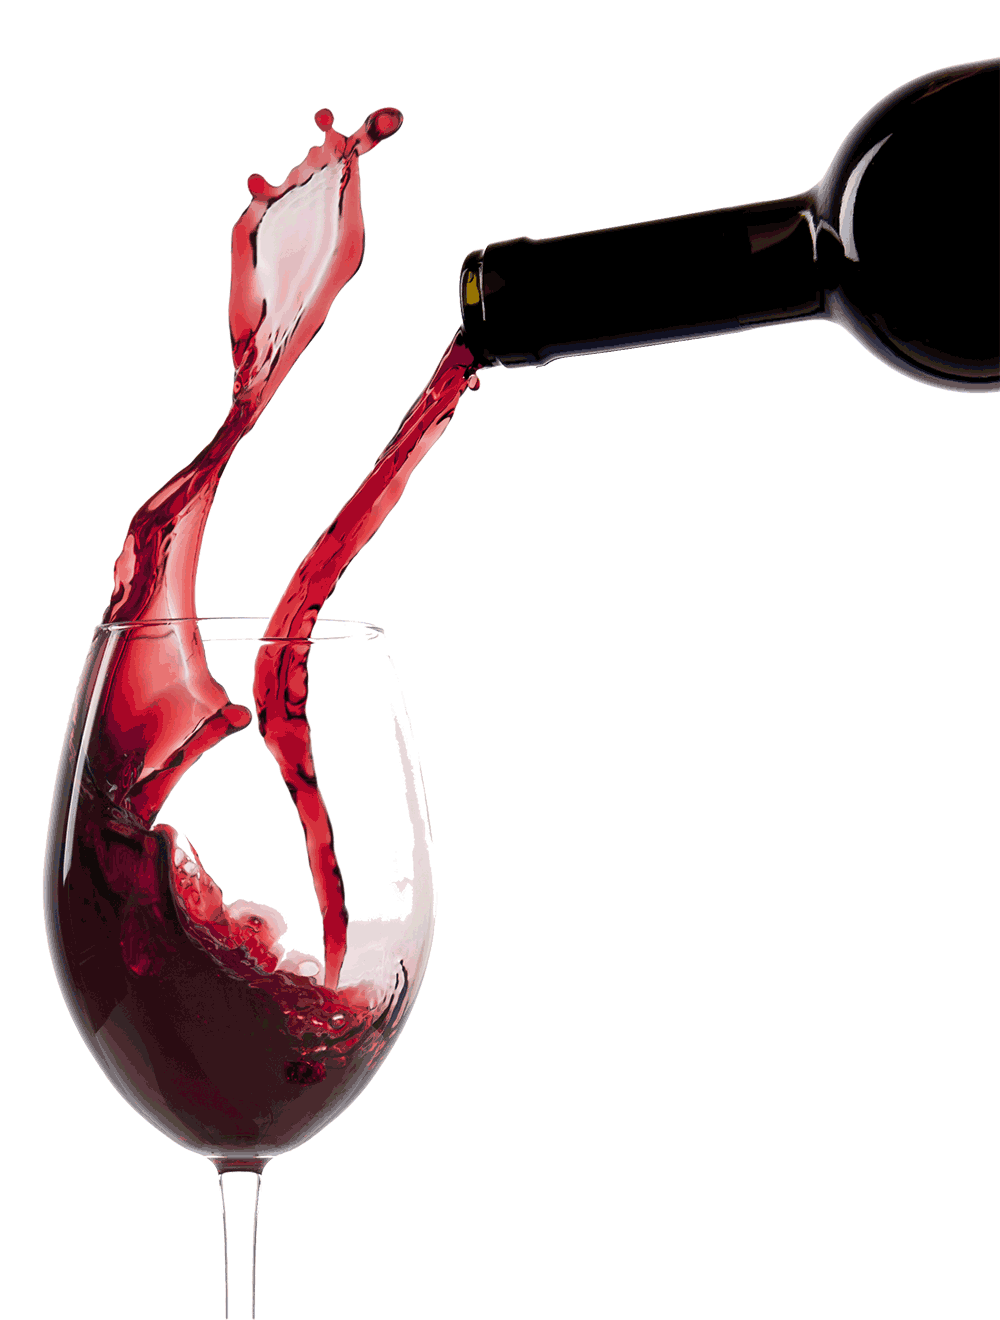 Download Wine Glass Png Image HQ PNG Image in different resolution